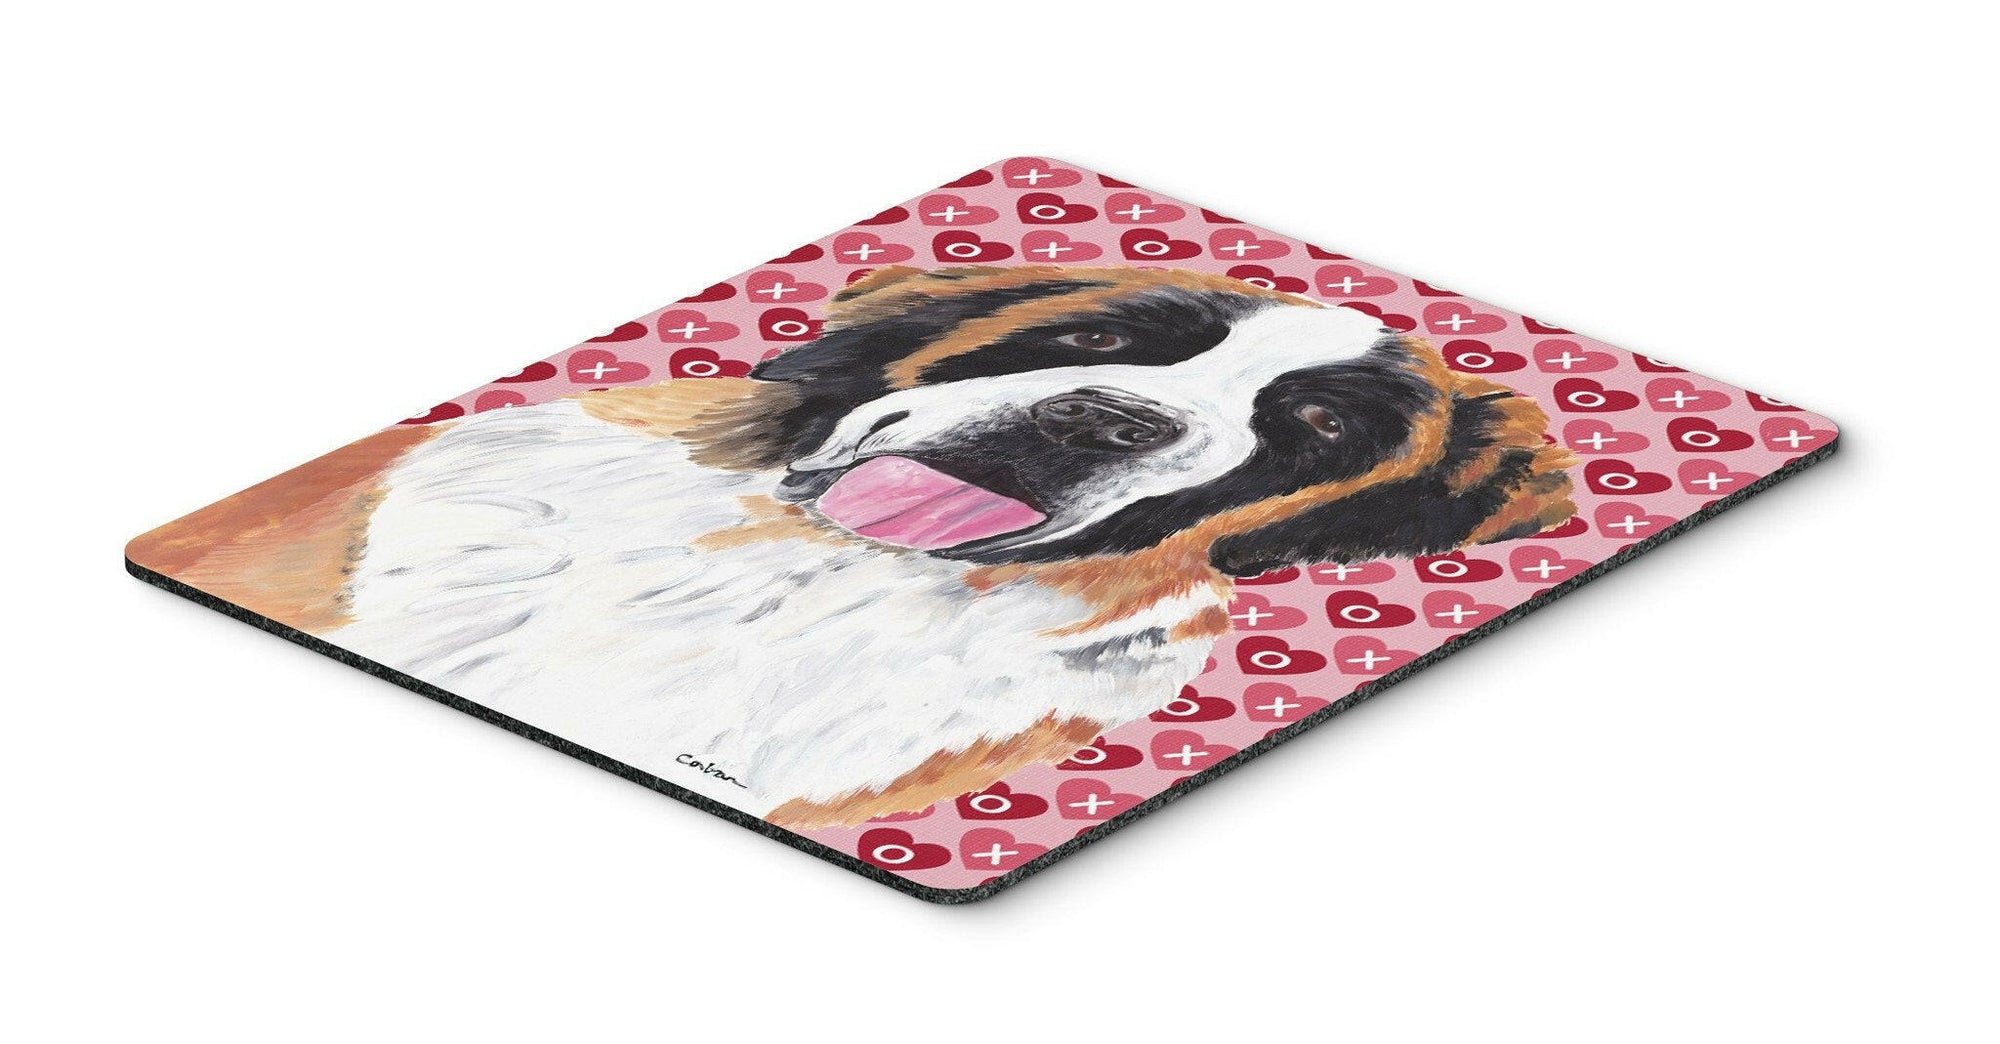 Saint Bernard Hearts Love and Valentine's Day Mouse Pad, Hot Pad or Trivet by Caroline's Treasures